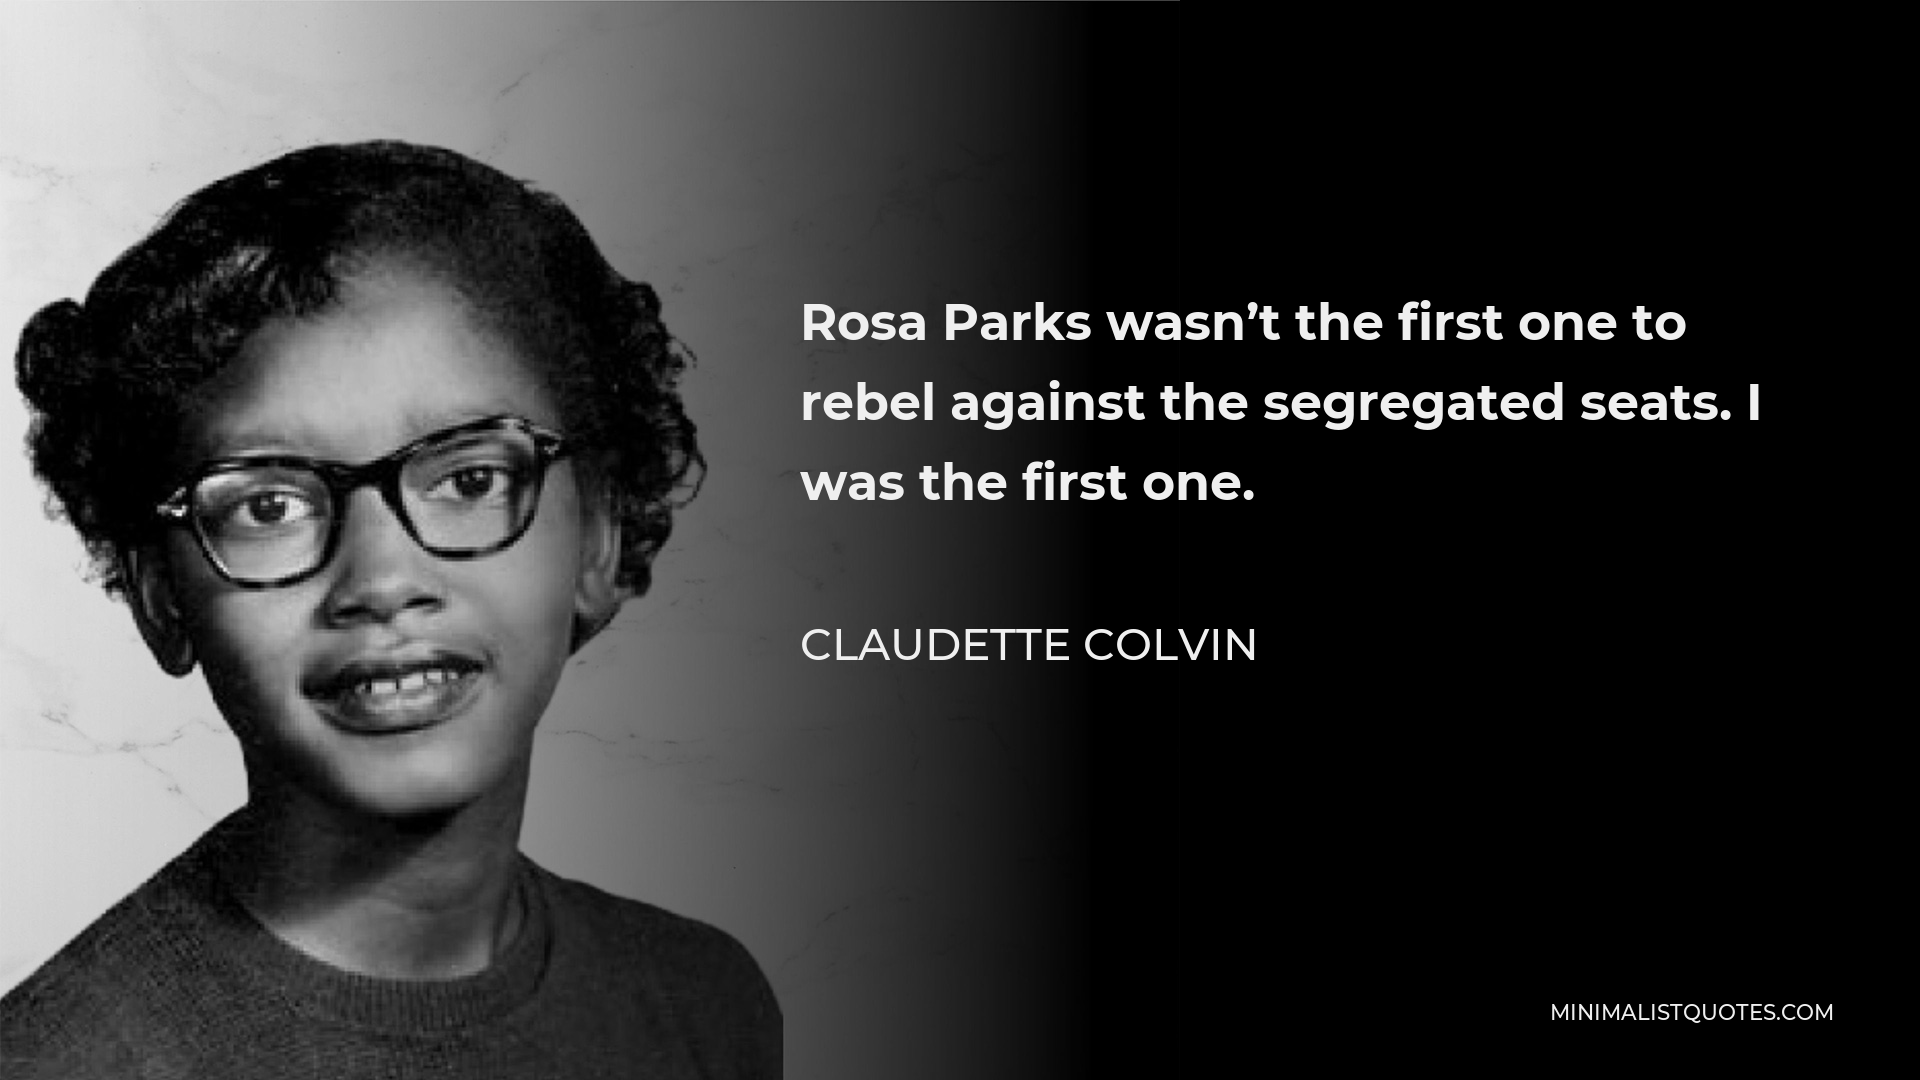 Claudette Colvin Quote - Rosa Parks wasn’t the first one to rebel against the segregated seats. I was the first one.